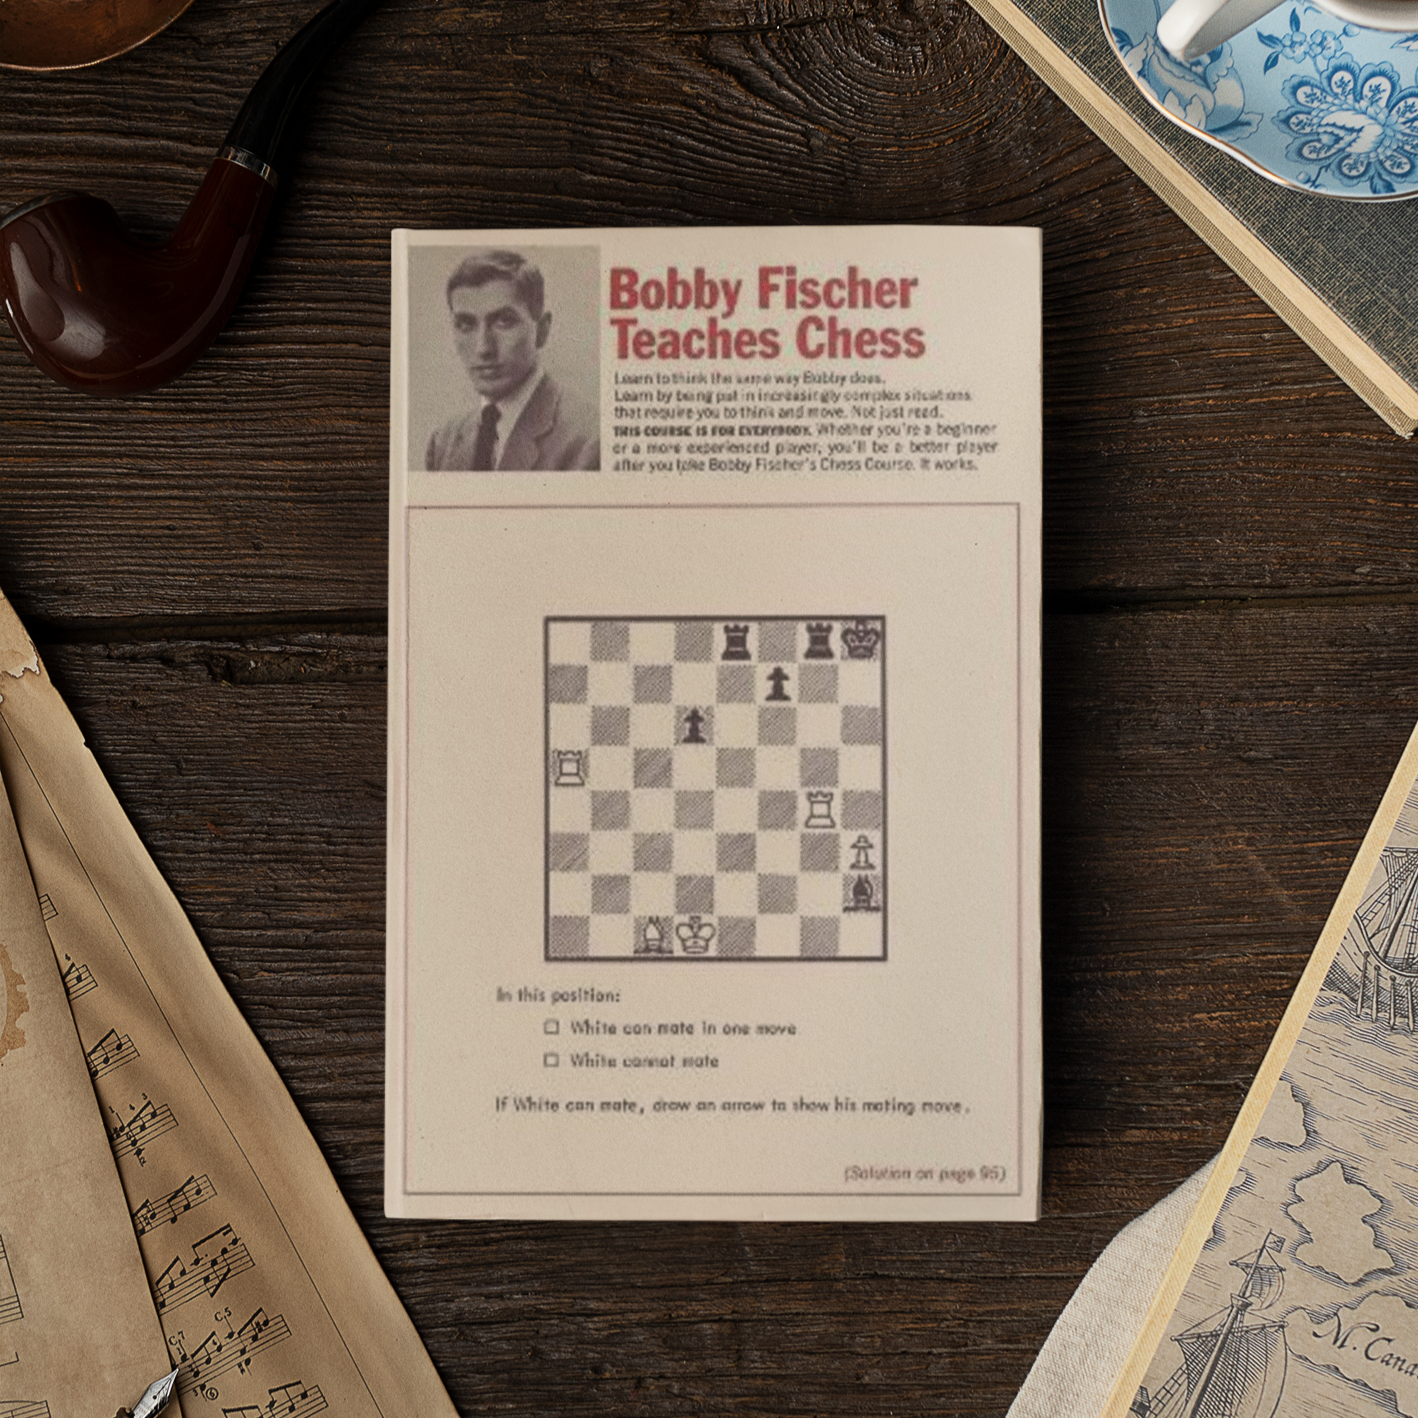 Bobby Fischer Learn to Play Chess – TDC Games